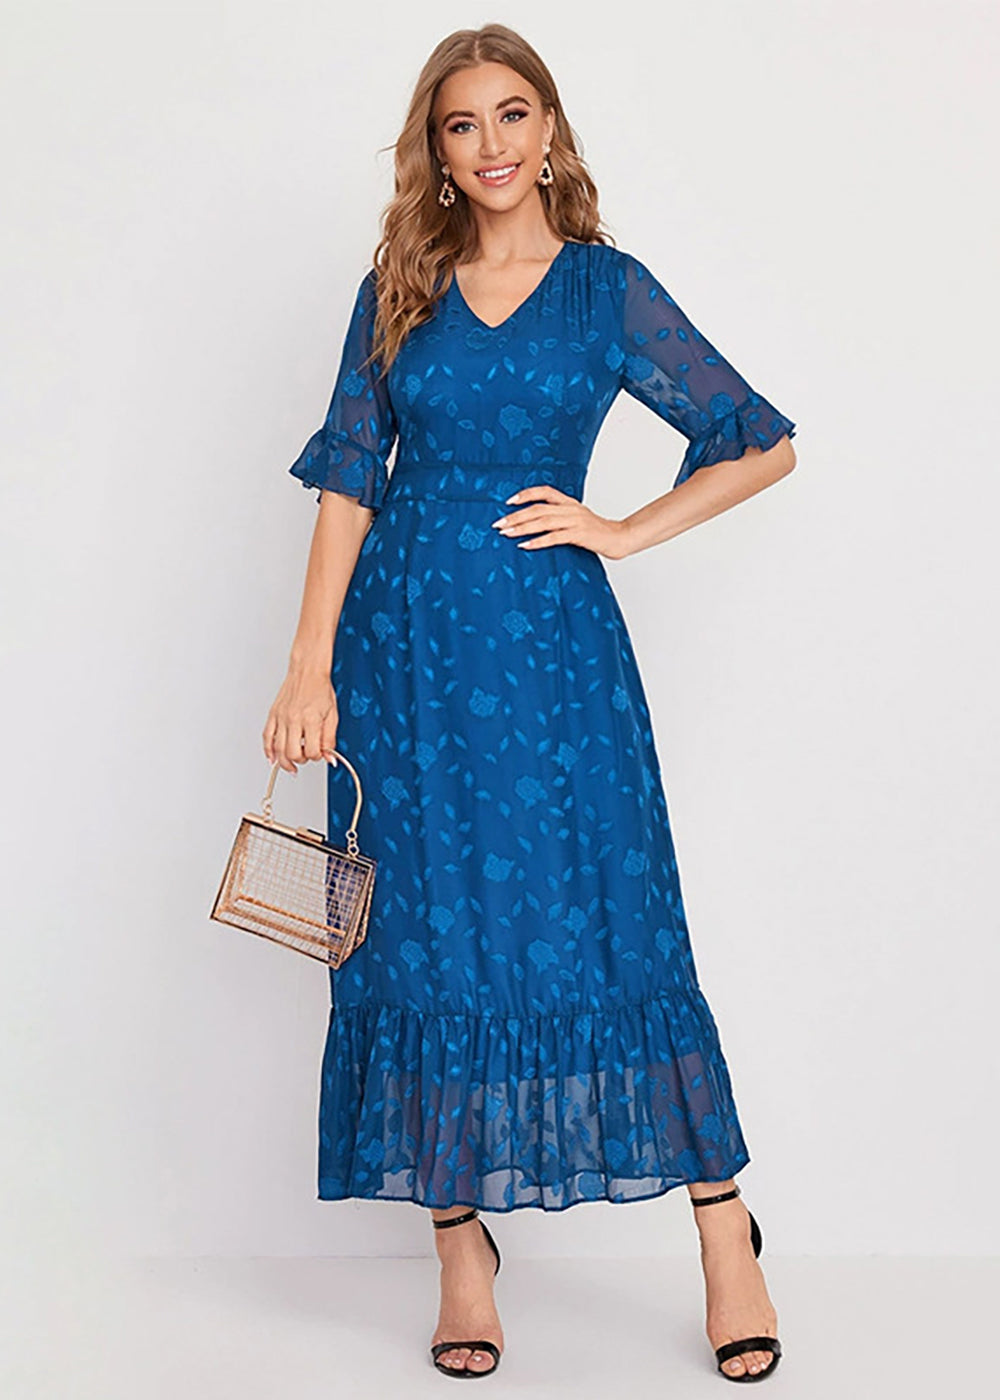 Blue Printing Chiffon Ankle Length A-line Short Sleeve Mother of the Bride Dress